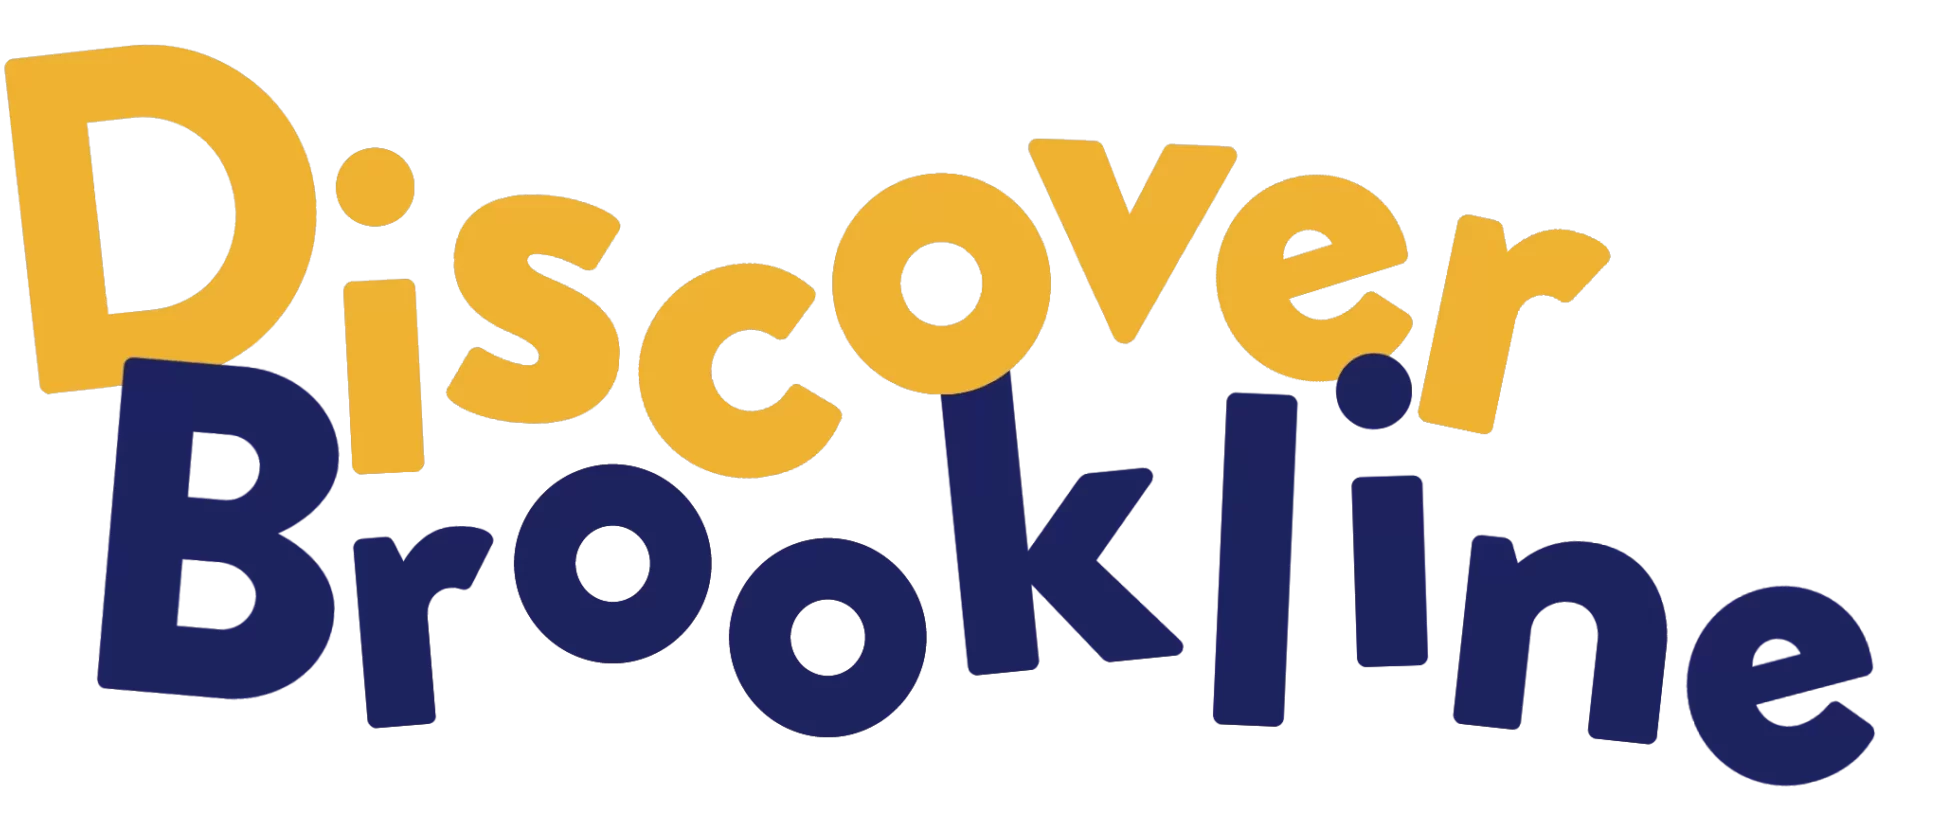 A website of the Brookline Chamber of Commerce